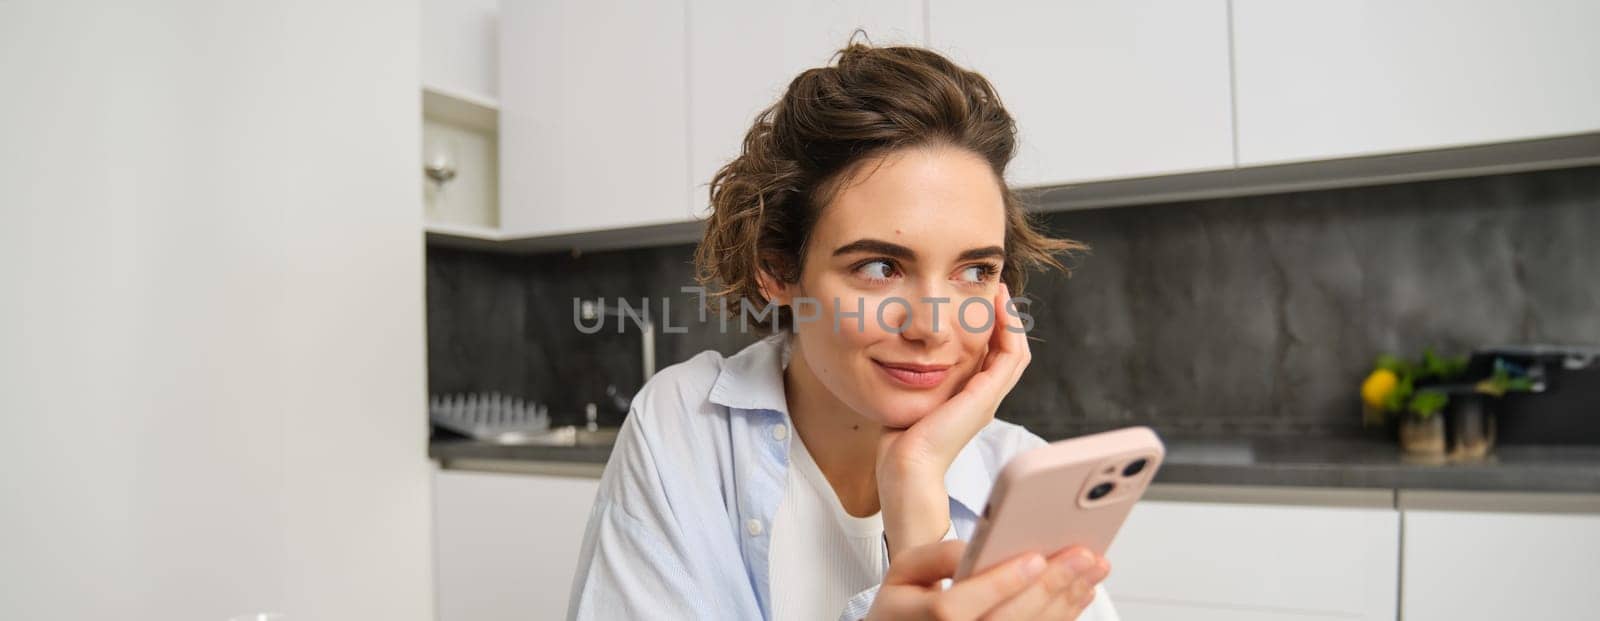 Portrait of woman thinking while holding smartphone, deciding what to order on mobile phone app.